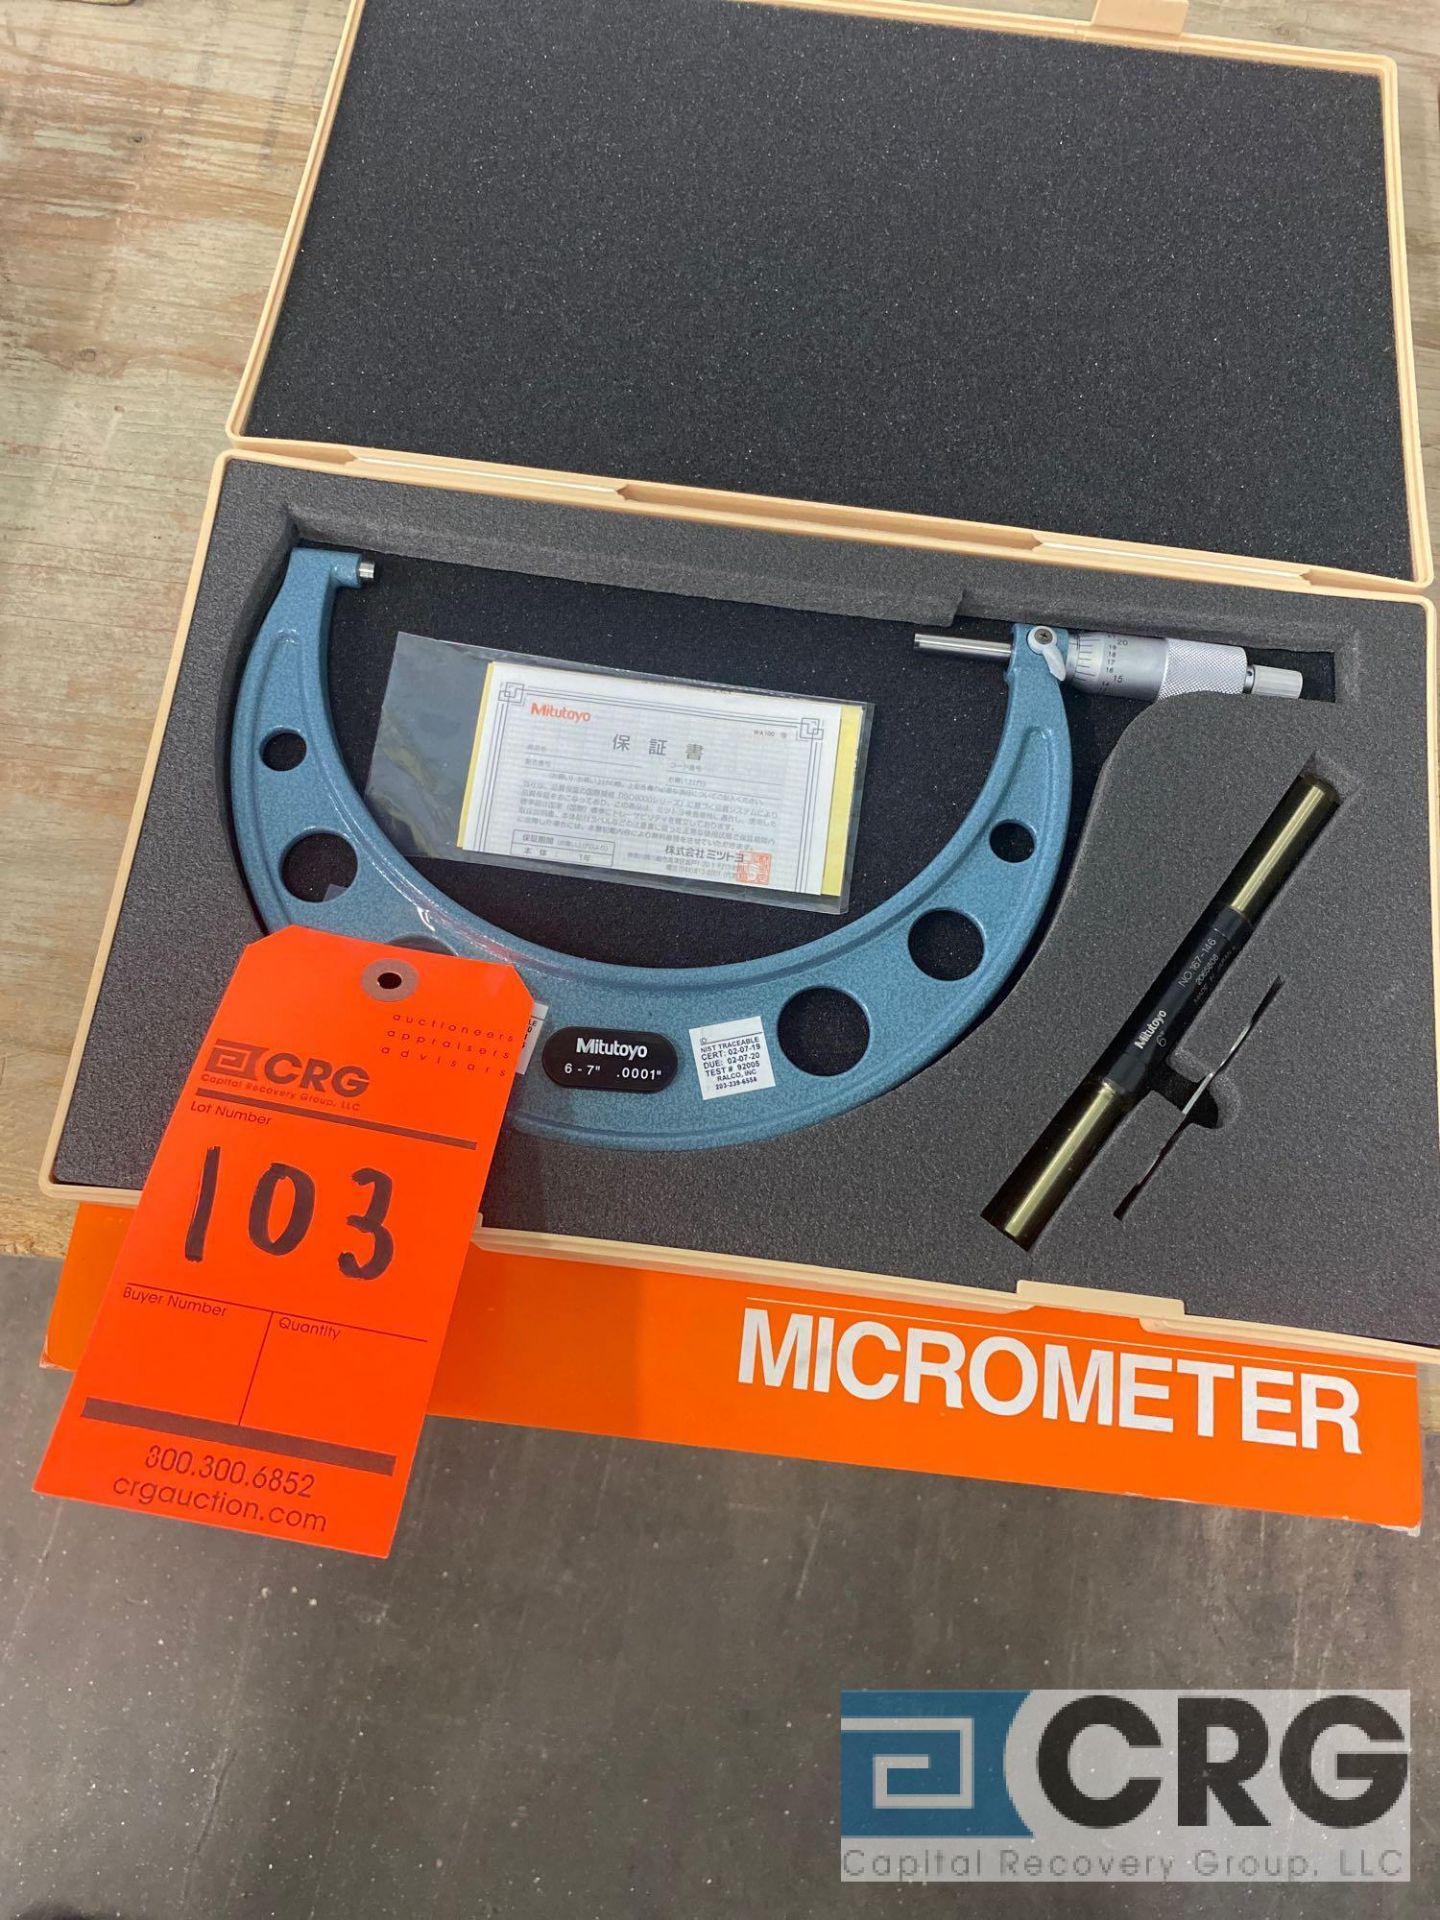 Mitutoyo 6-7 inch outside micrometer, MN 103-221, with case